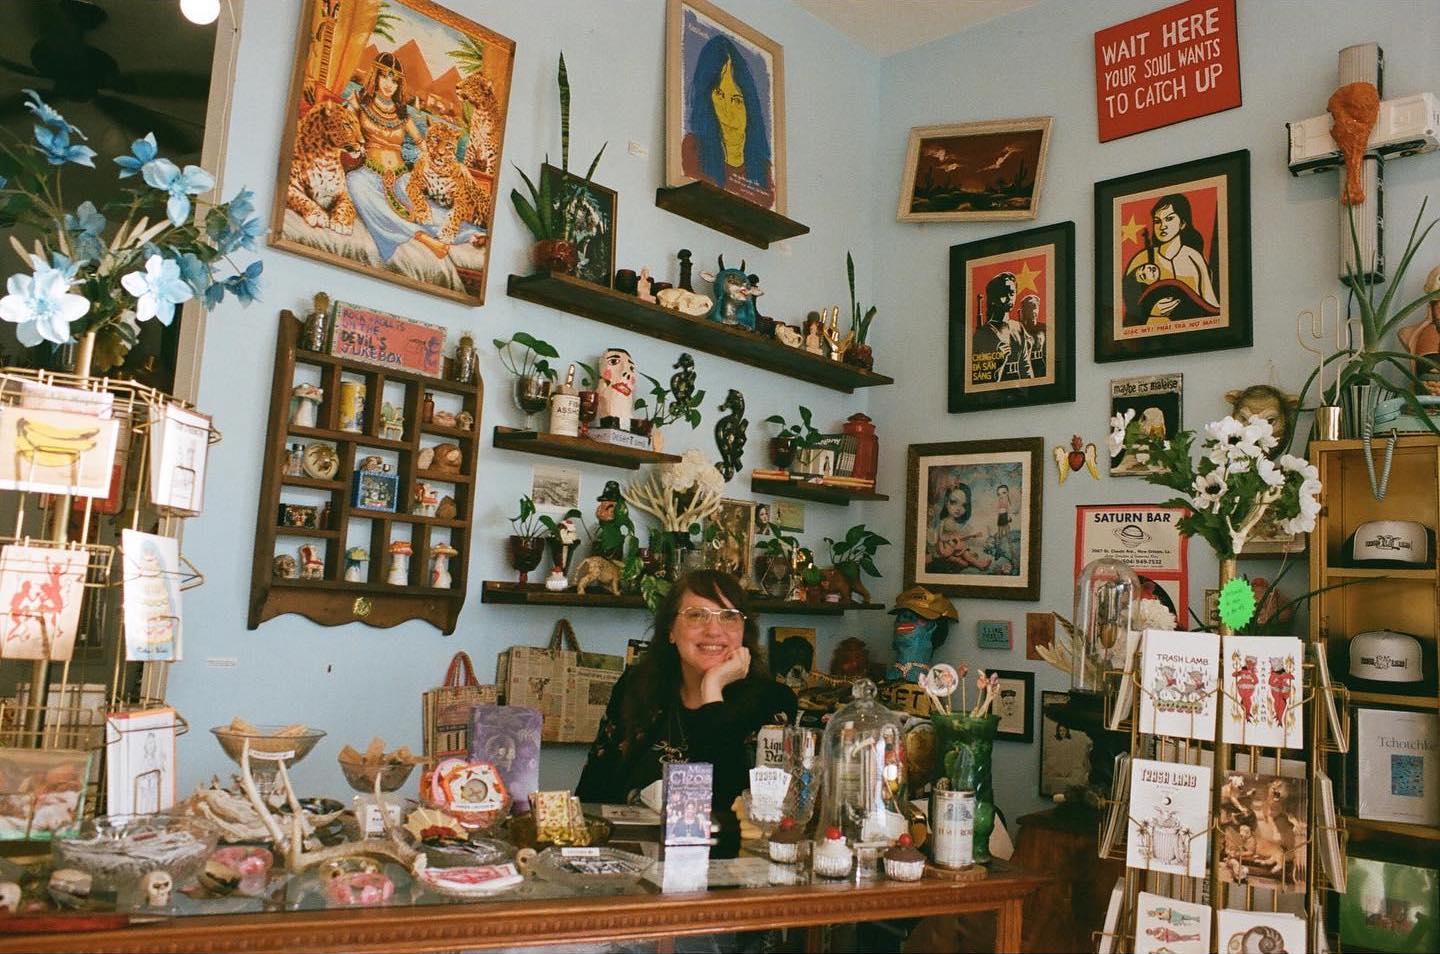 Interior of Trash Lamb Gallery in South Park, San Diego featuring its founder Melody Jean Moulton 